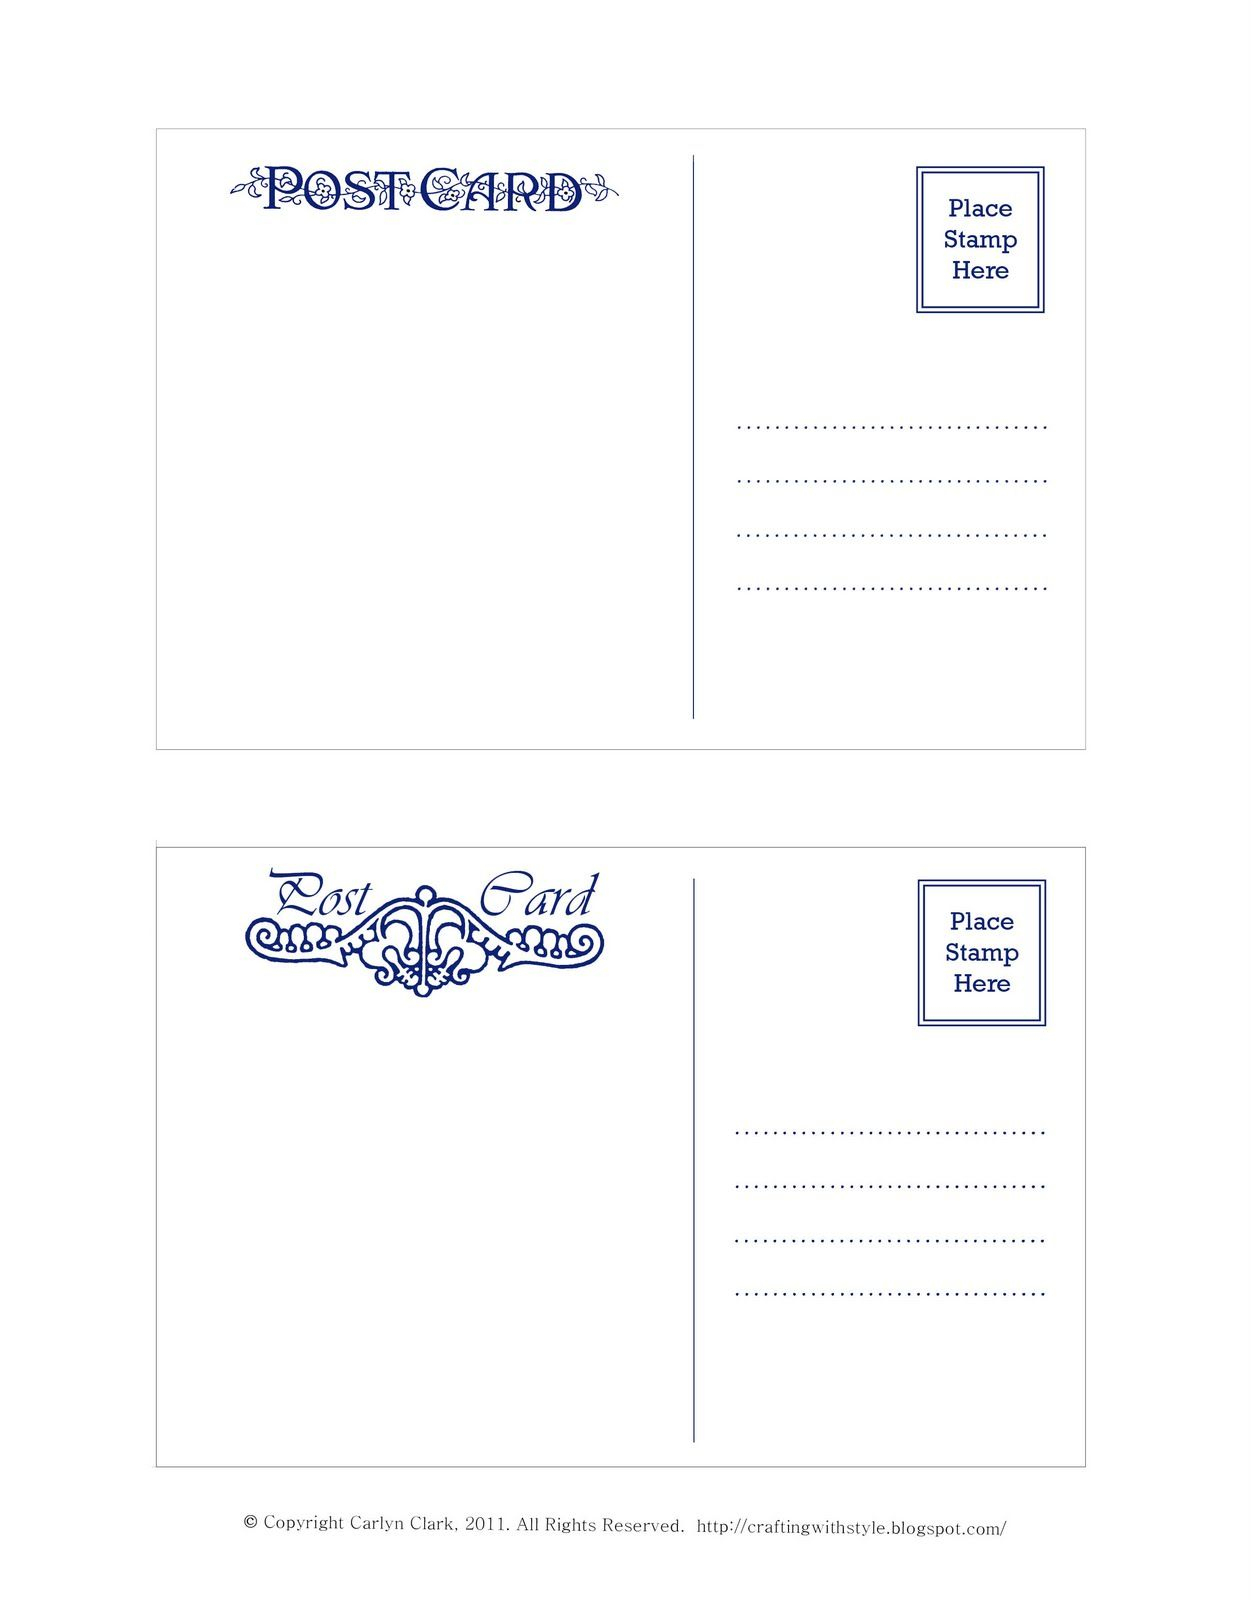 Crafting With Style: Free Postcard Templates | Postcards | Pinterest - Free Printable Postcards